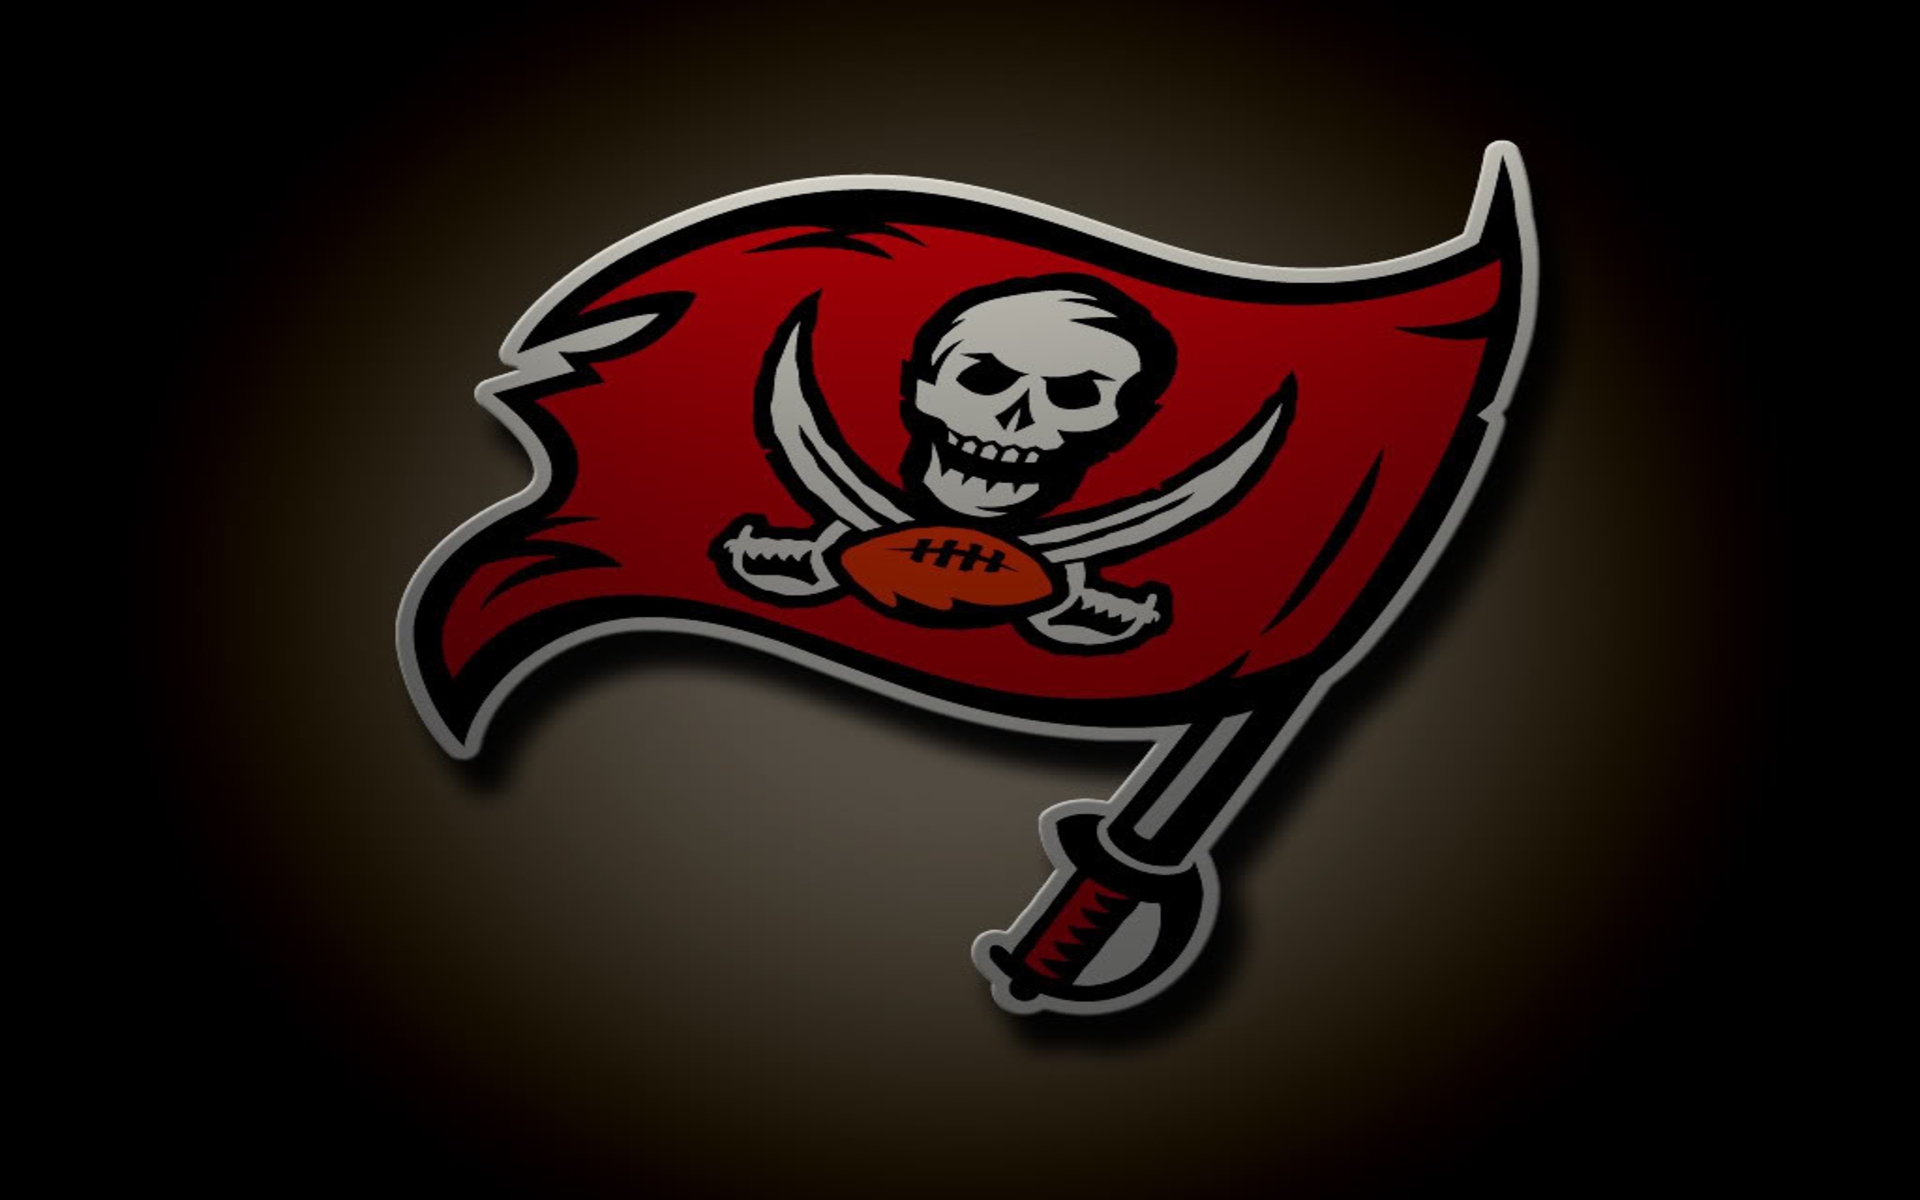 High Quality Tampa Bay Buccaneers Wallpaper Full HD Pictures